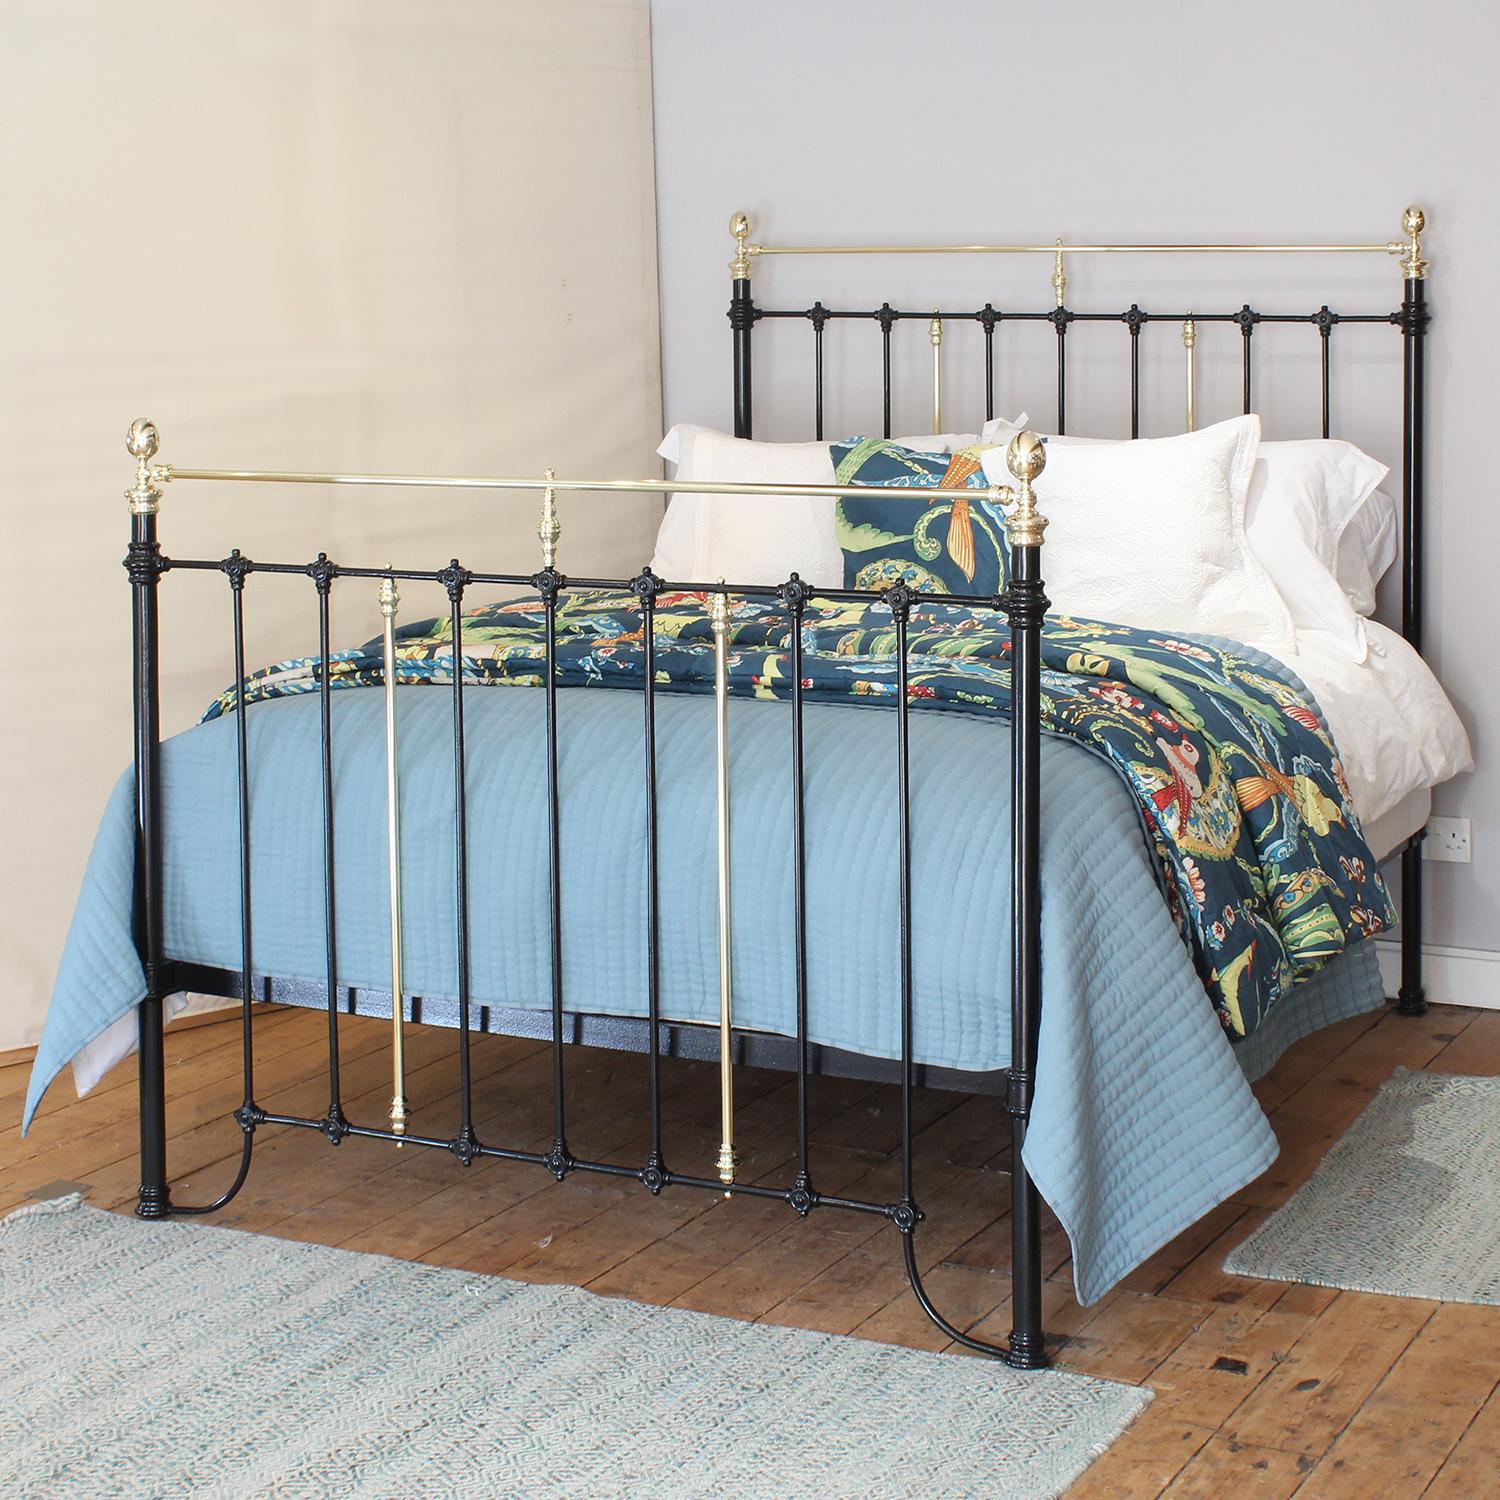 A fine example of a Victorian brass and iron bed finished in black with straight brass top rail and oval brass knobs.

This bed accepts a UK King or US Queen, 5ft or 60in wide, mattress and base.

The price also includes a firm bed base to support